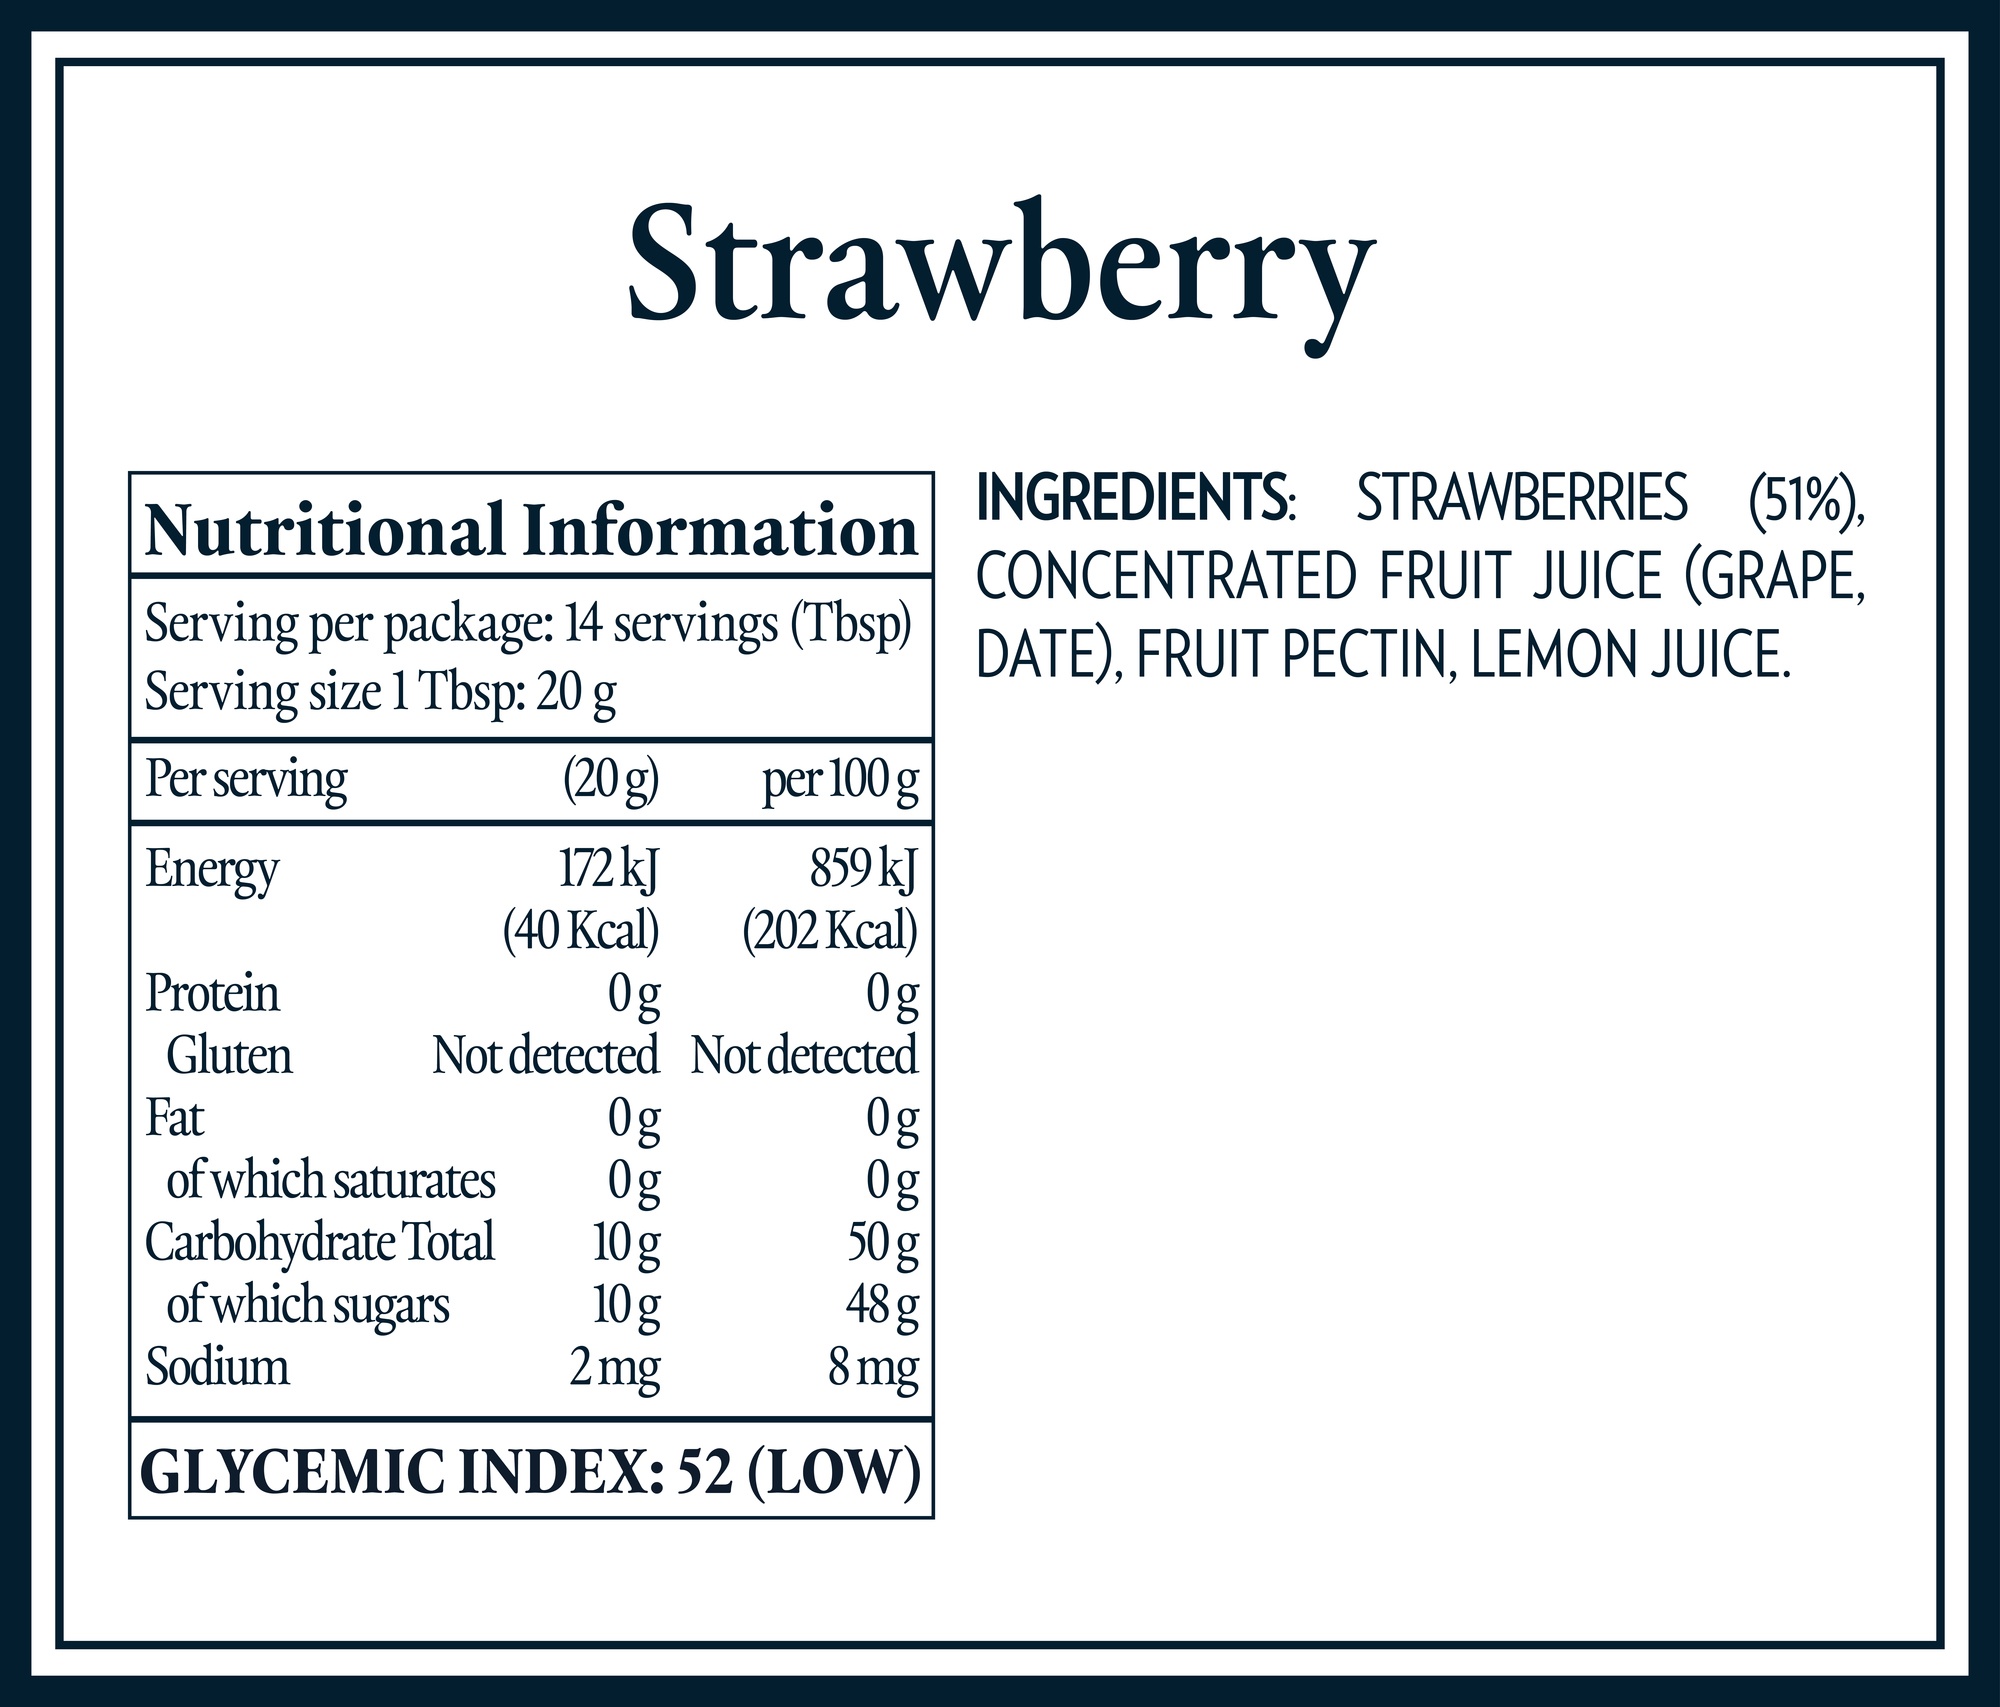 Nutrition Tables & Ingredients 2_AUS_strawberry